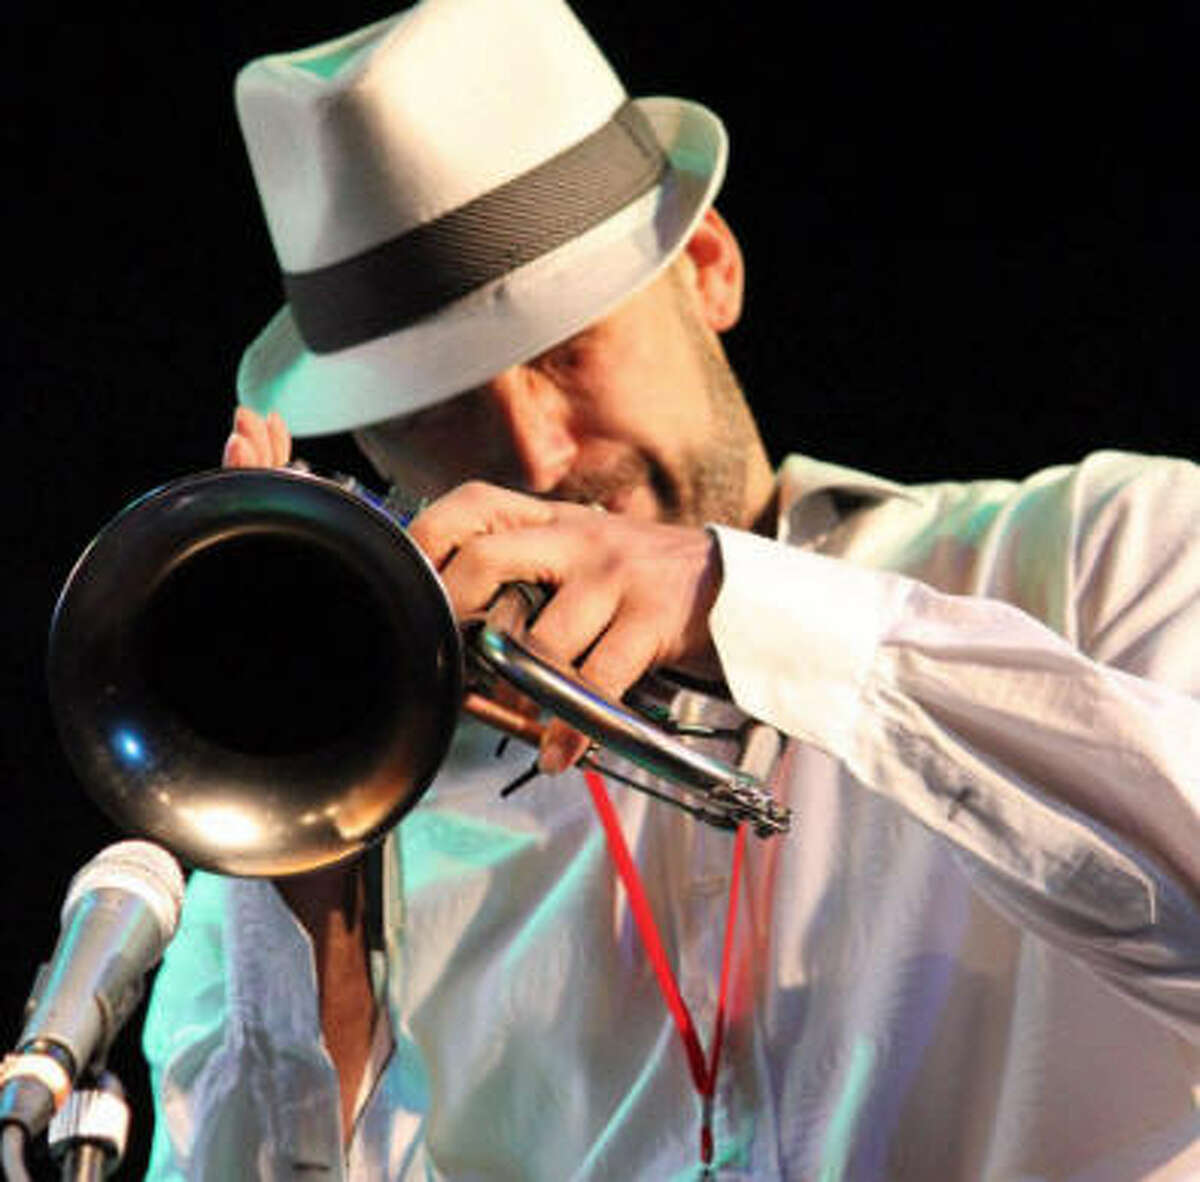 Trumpeter Preston Smith will present a Mother's Day concert at LaCenterra at Cinco Ranch.